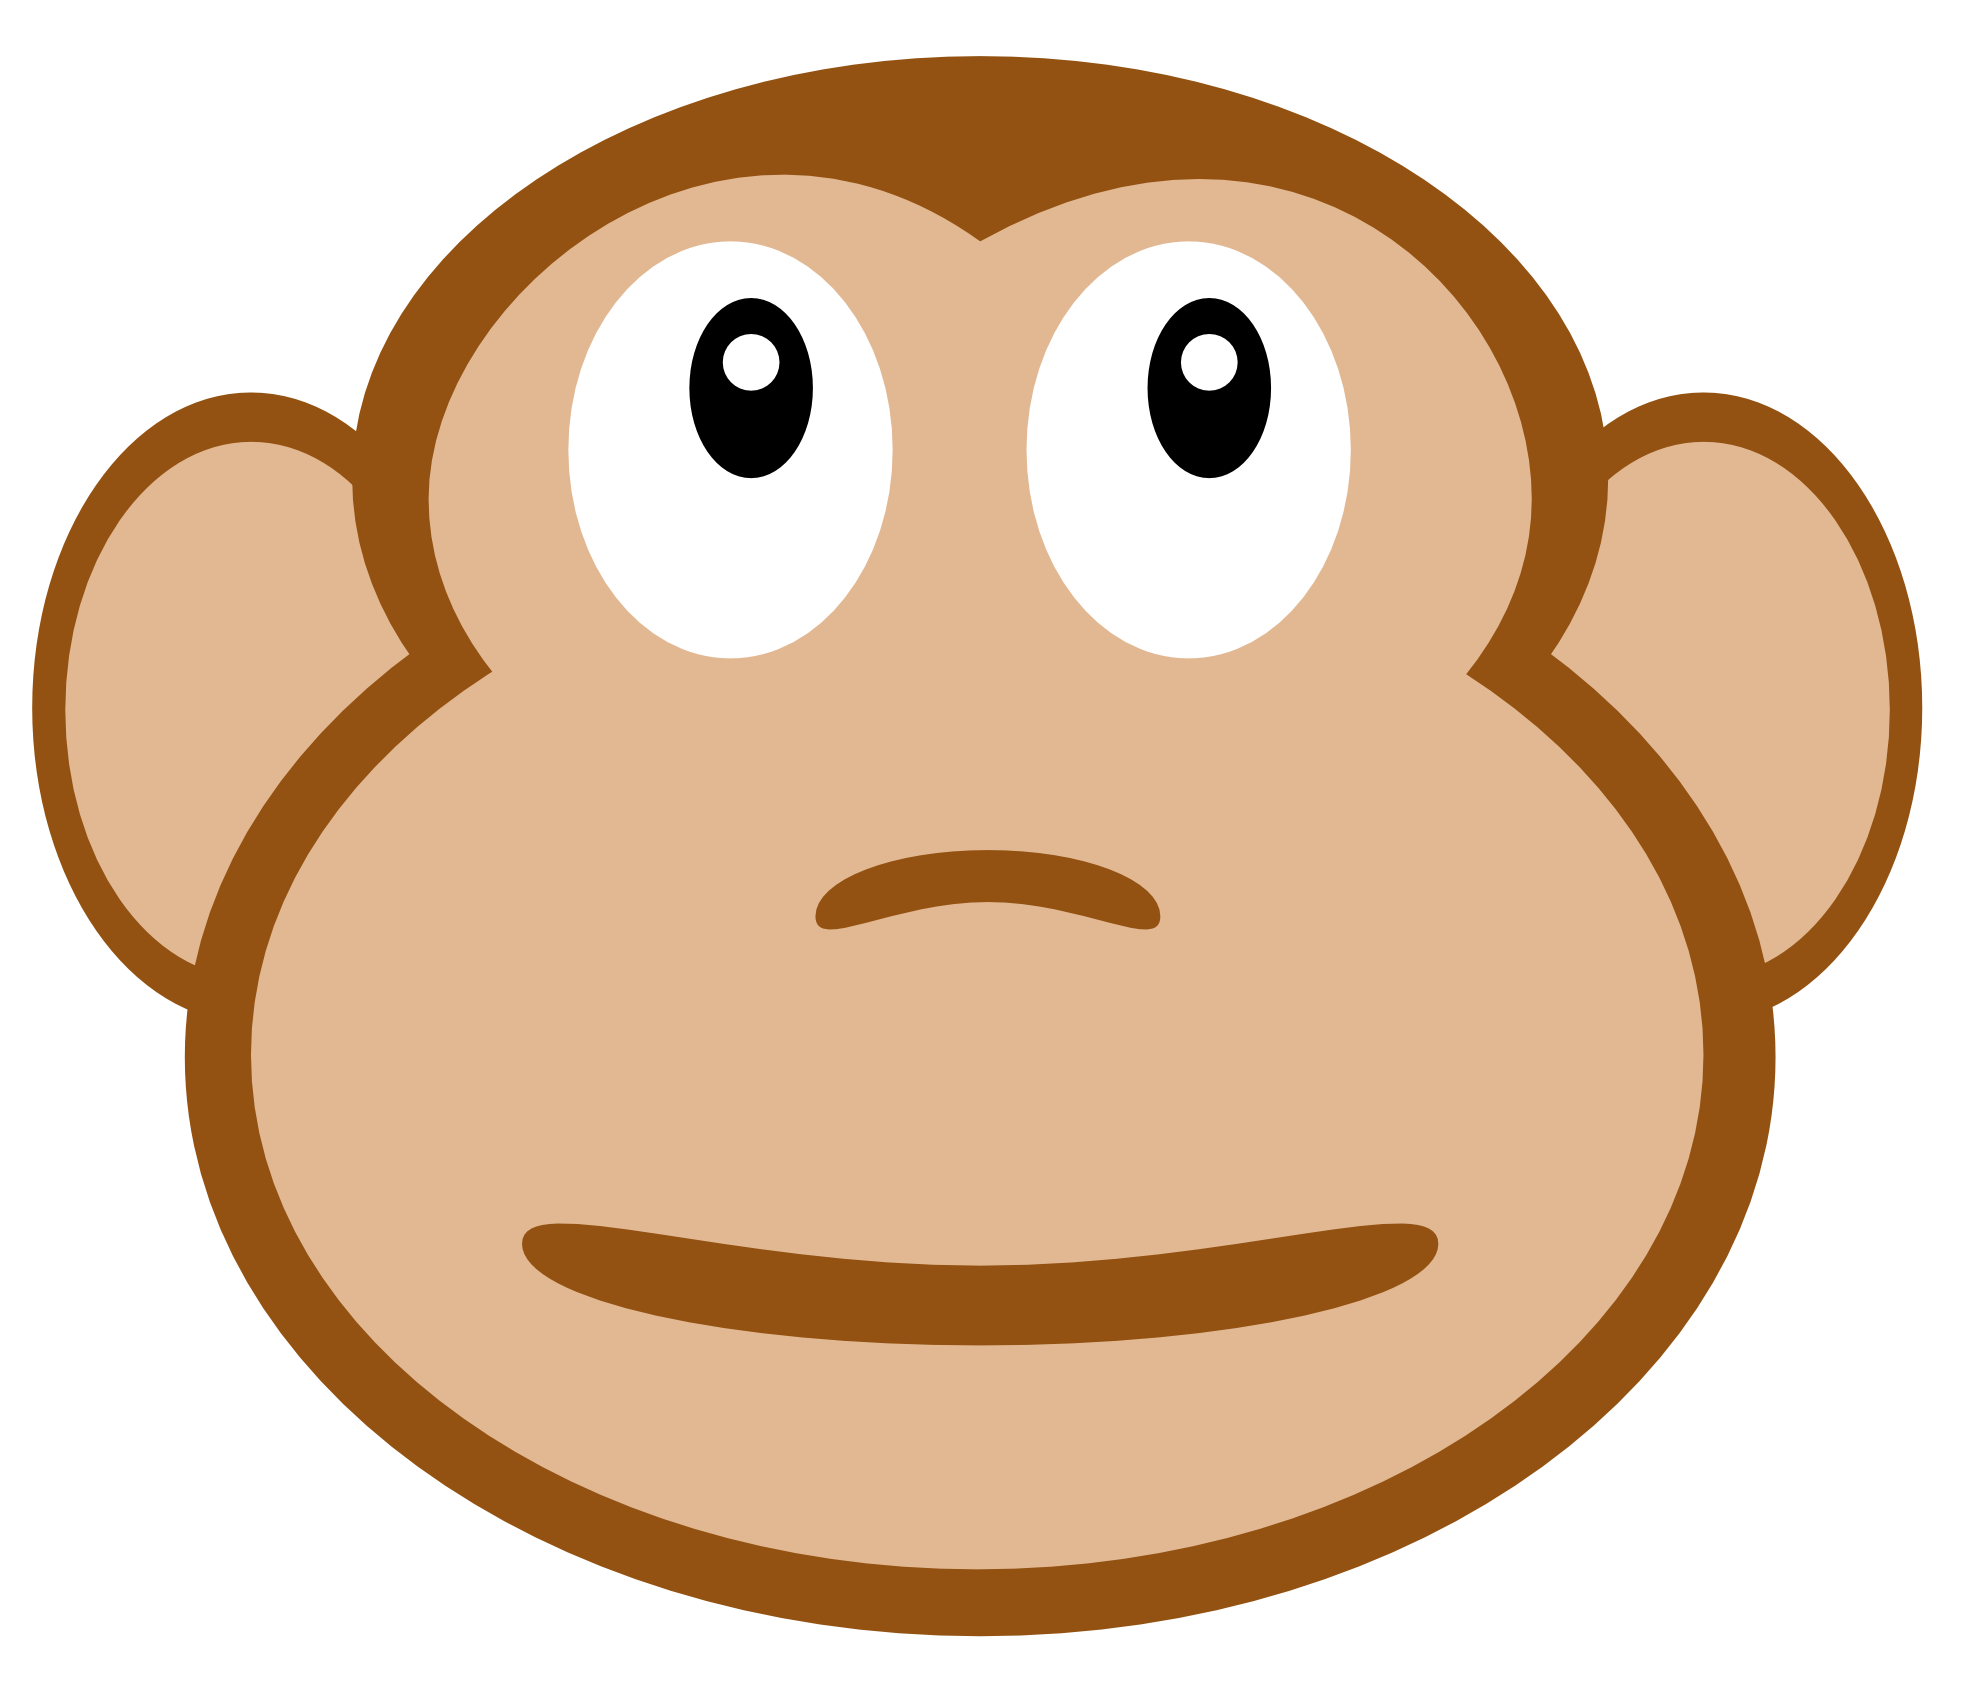 Monkey Face Drawing - Clipart library